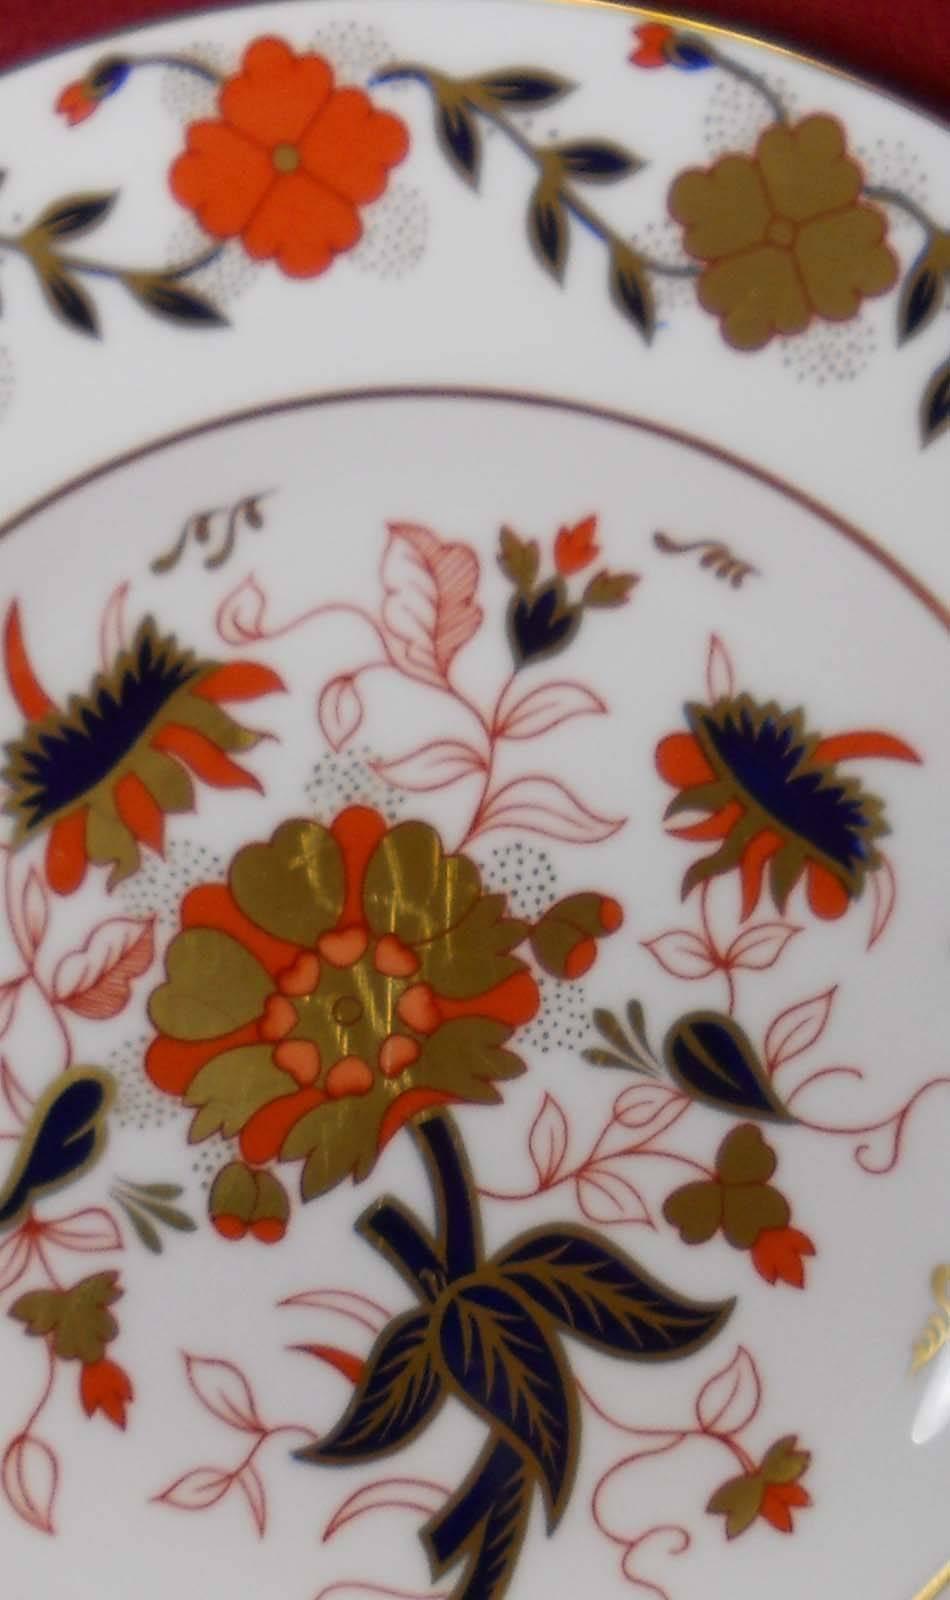 The Royal Crown Derby Porcelain Company is owned by one of the world’s most respected ceramic brands, Steelite International, which has its headquarters in the English ‘Potteries’. It employs around 200 skilled craftspeople and manufactures the